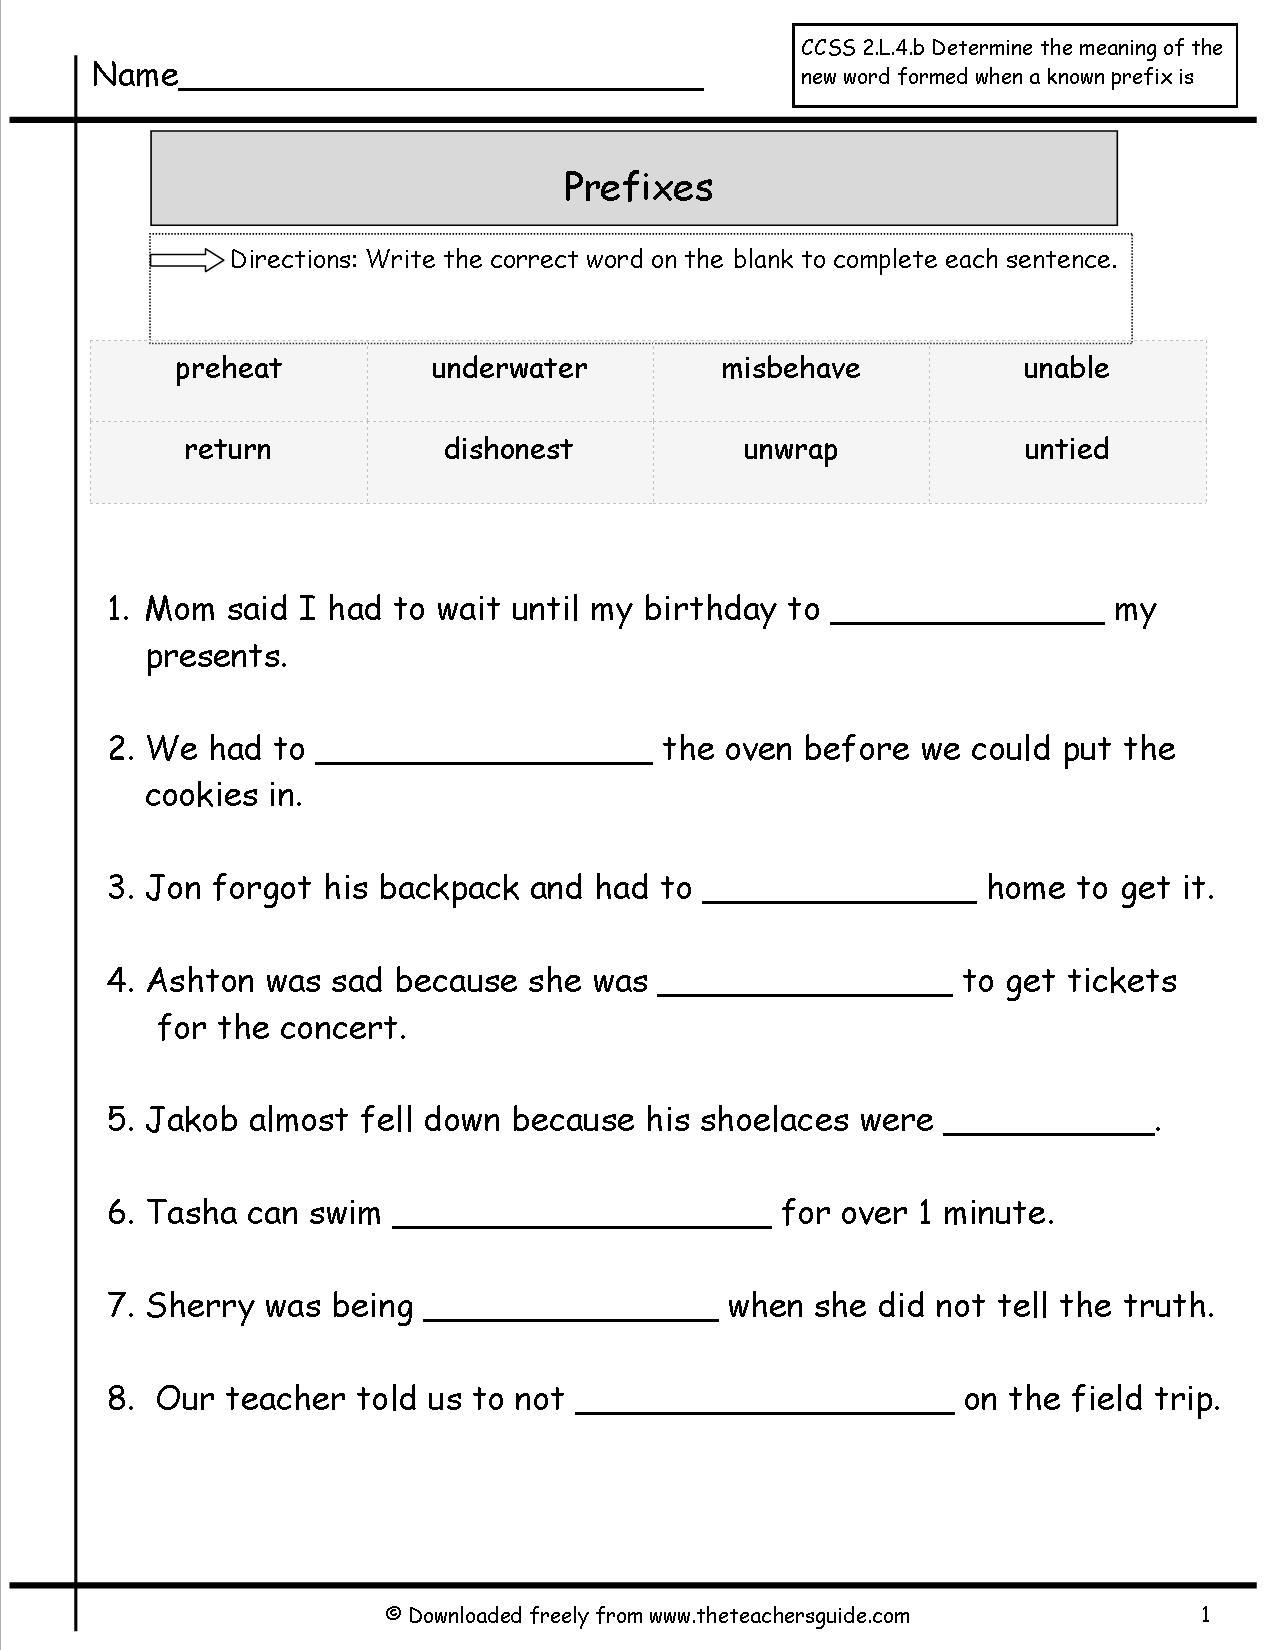 Prefixes Worksheet 3rd Grade Prefixes and Suffixes Worksheets Look at This One Next Week